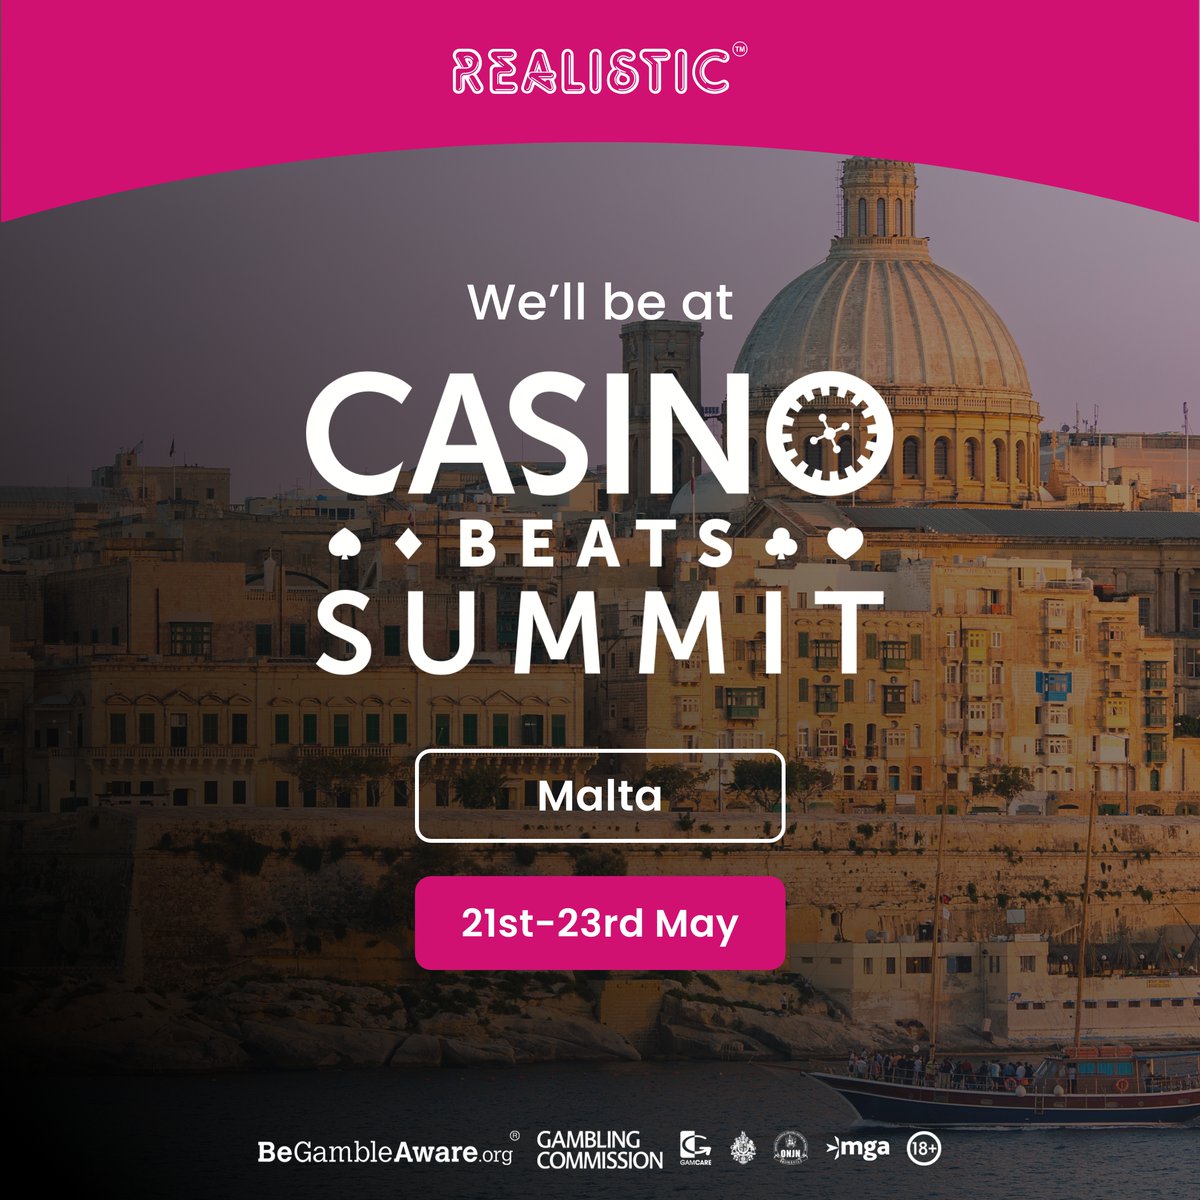 📢 Exciting news! We are gearing up to visit the CasinoBeats Summit in beautiful Malta next week! 🌴🎰 Can’t wait to see you there! @SBCGAMINGNEWS 

#CasinoBeats #Maxiplier #RealisticGames #onlineslot #iGaming